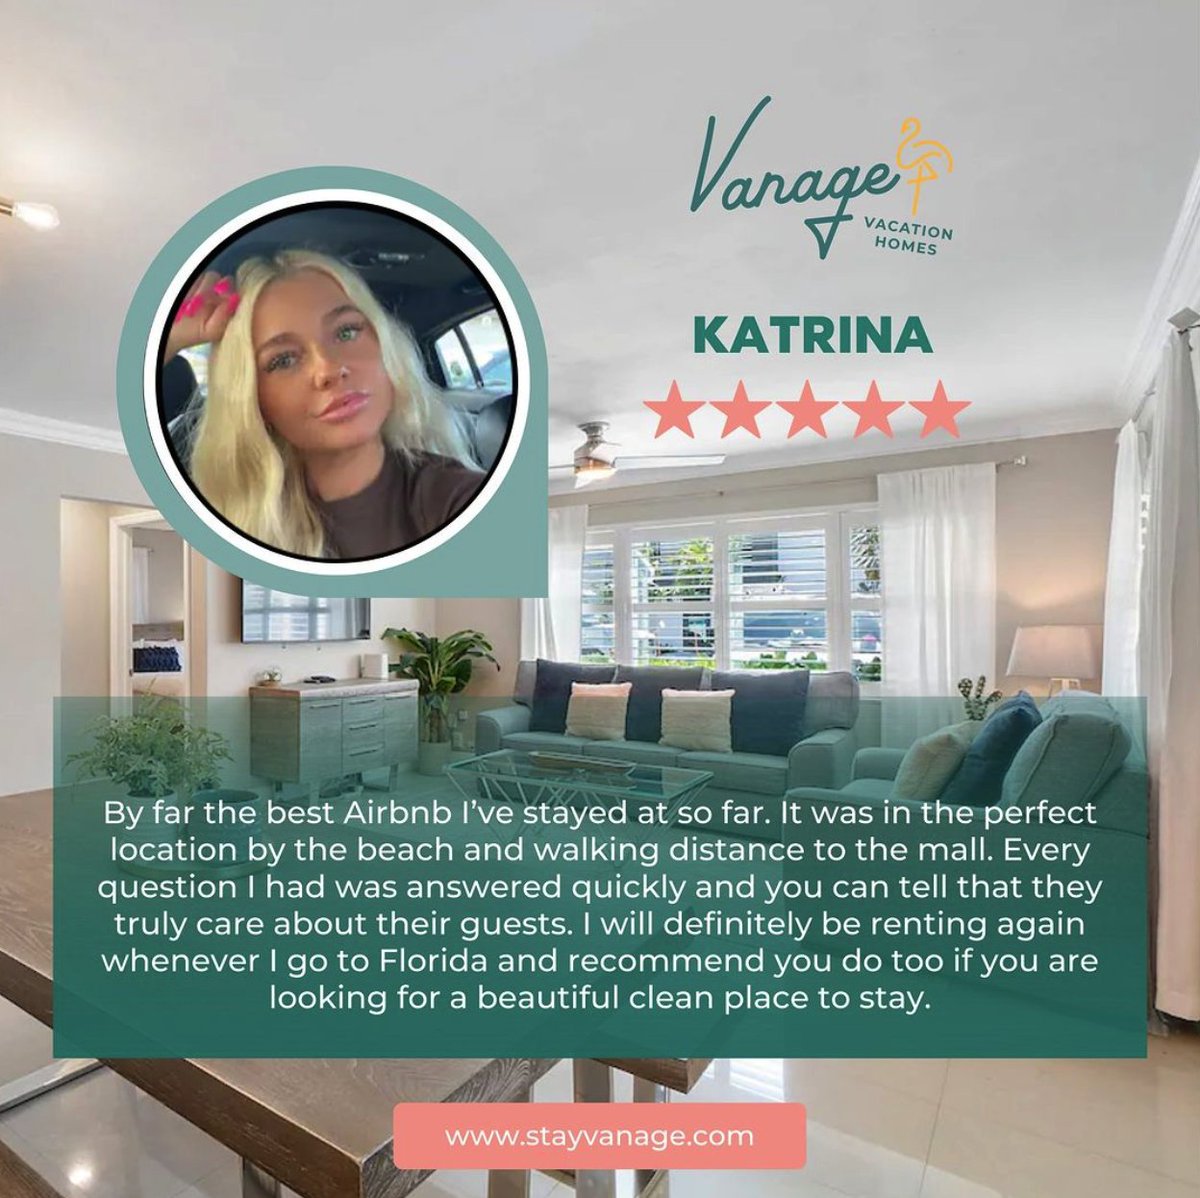 🔶 Thank you for your positive review, Katrina.
.
.
.
#gustreview #guesttestimonial #Floridavacation #Floridavacationrental #AirBnbexperience #homedecor #interiordesign #hometour #realestateinvesting #business